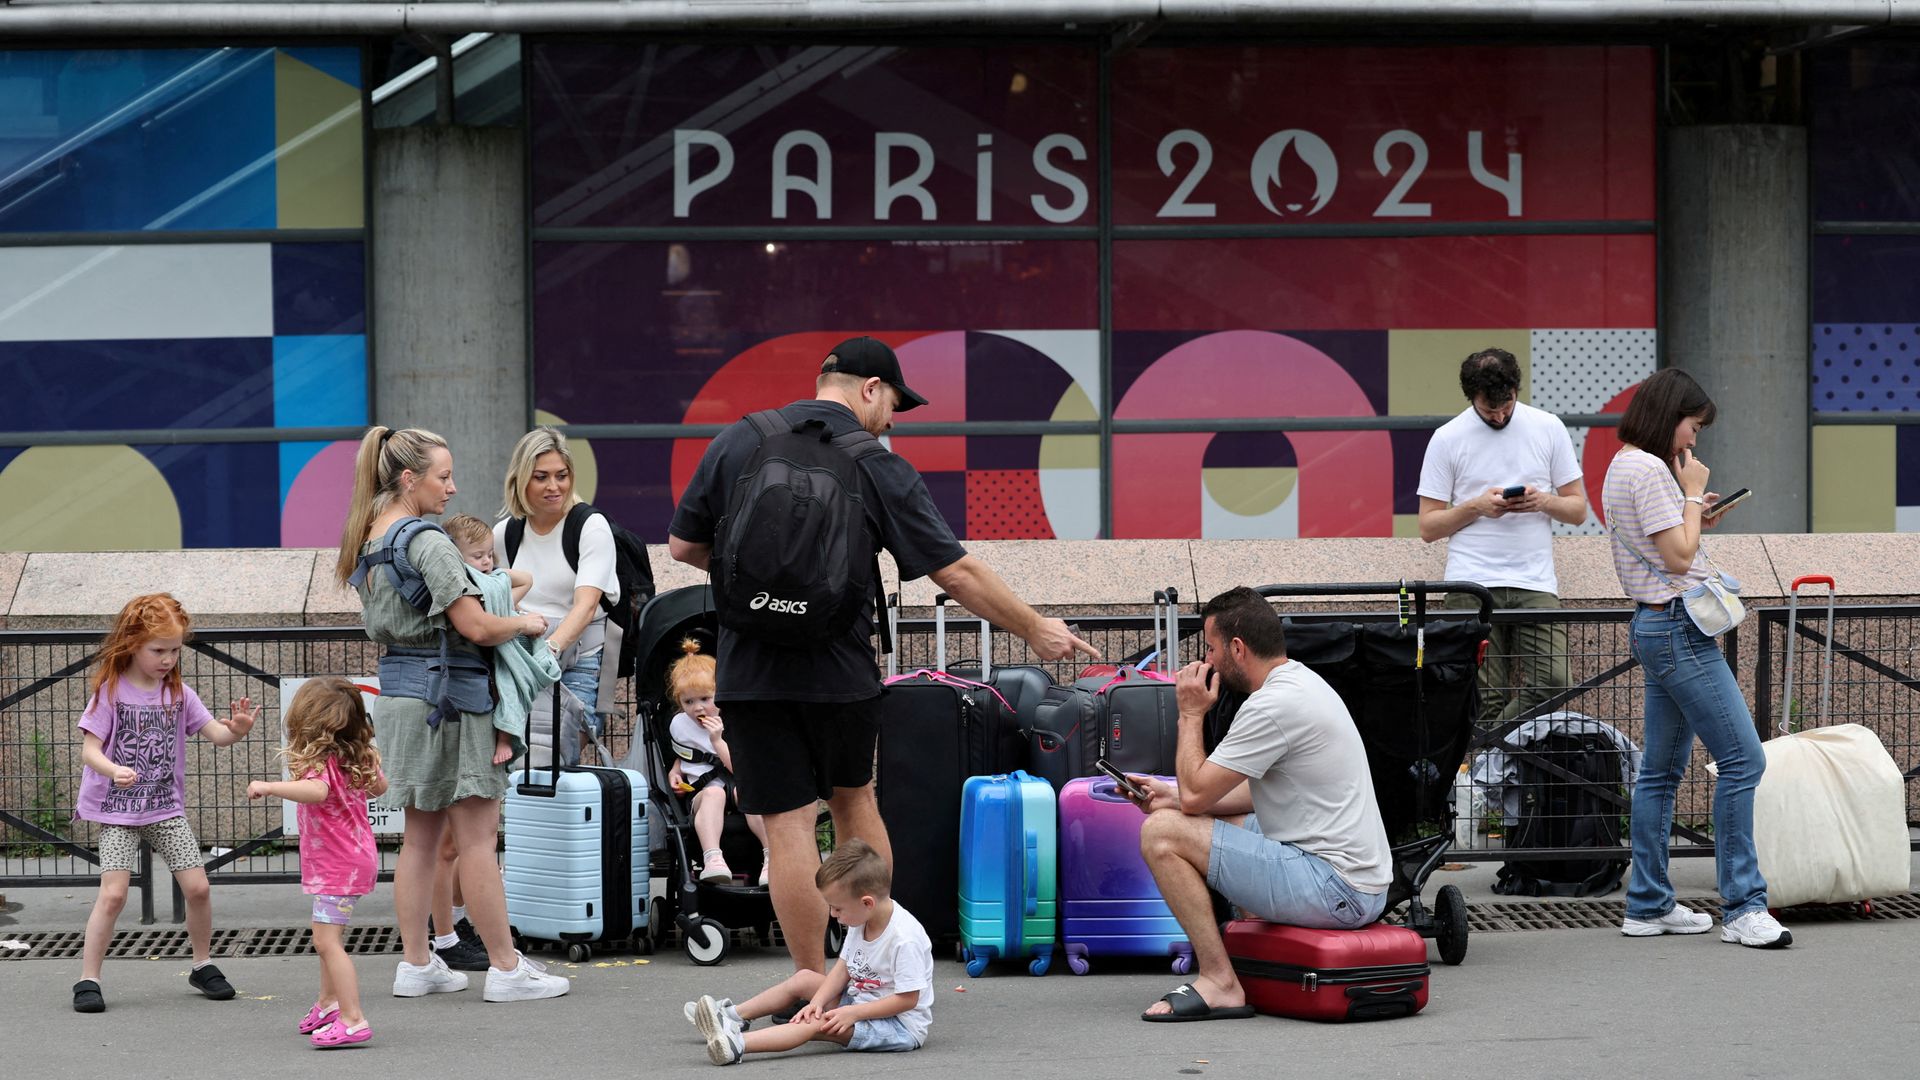 Who would cause such chaos on France's train networks before the Olympics, and avoid claiming publicity?